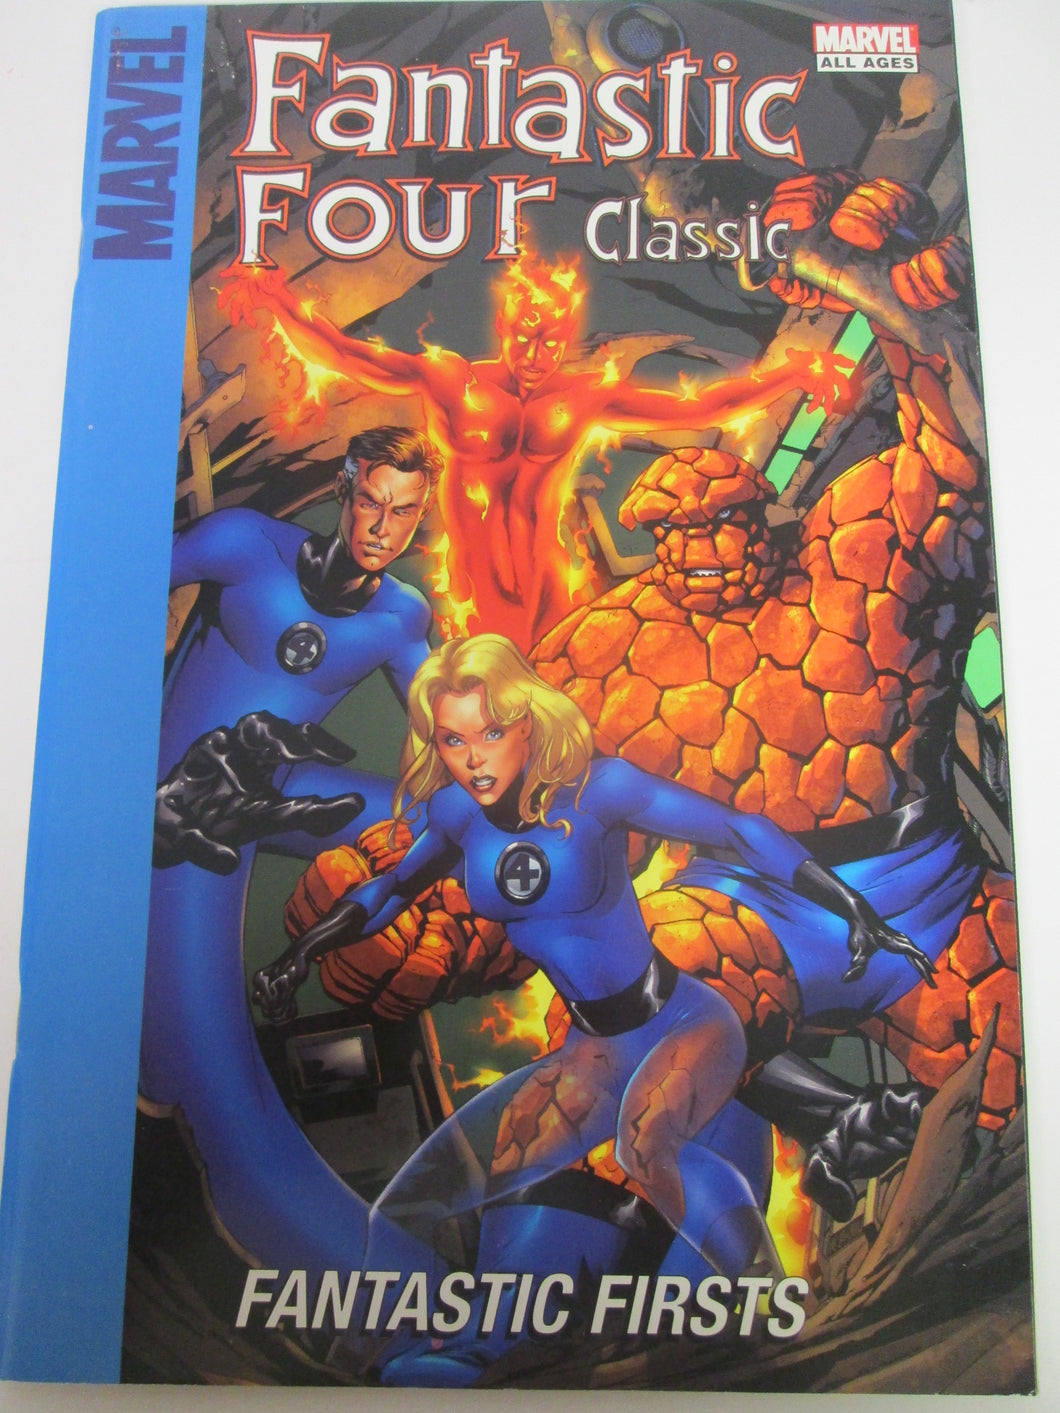 Target Fantastic Four Fantastic Firsts reprints FF 1-2 and Official Handbook of the Marvel Universe: FF 2006